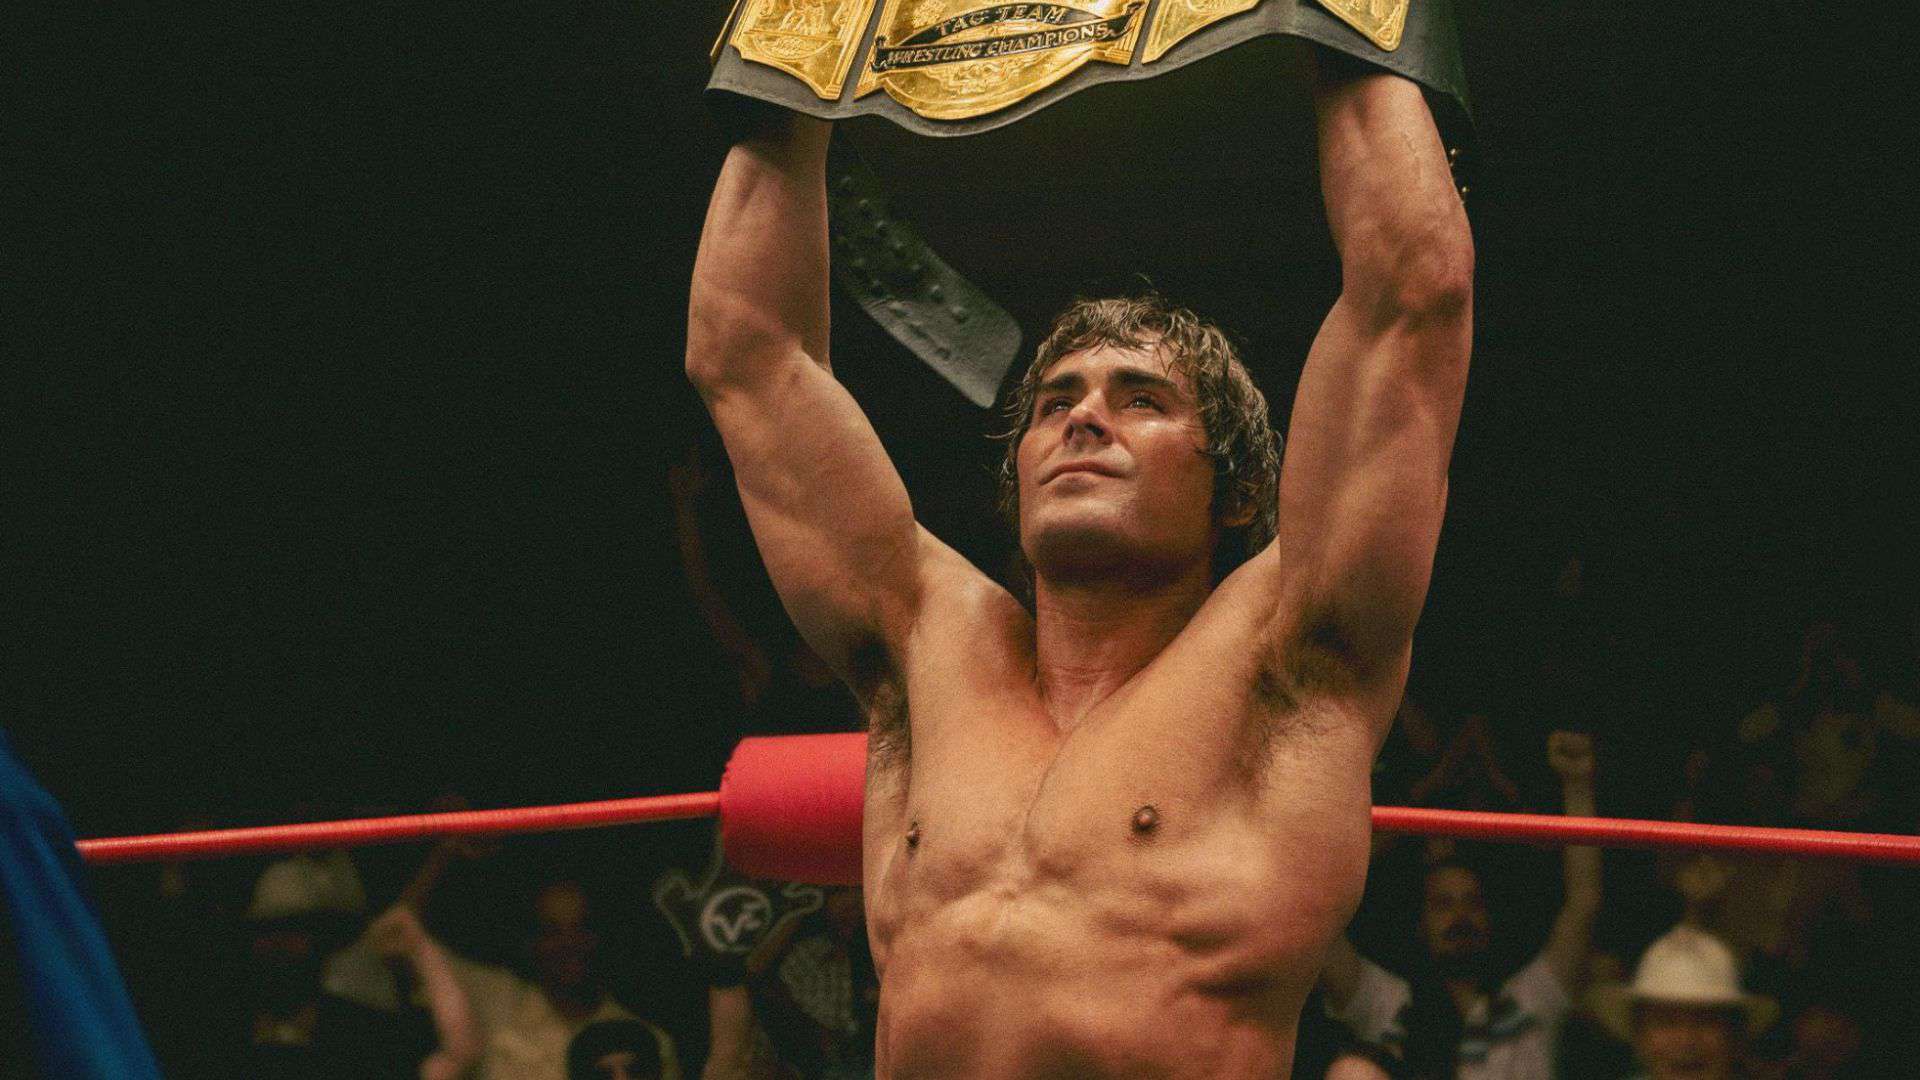 A wrestler holds up a belt for Tag Team Wrestling Champions in this image from A24.